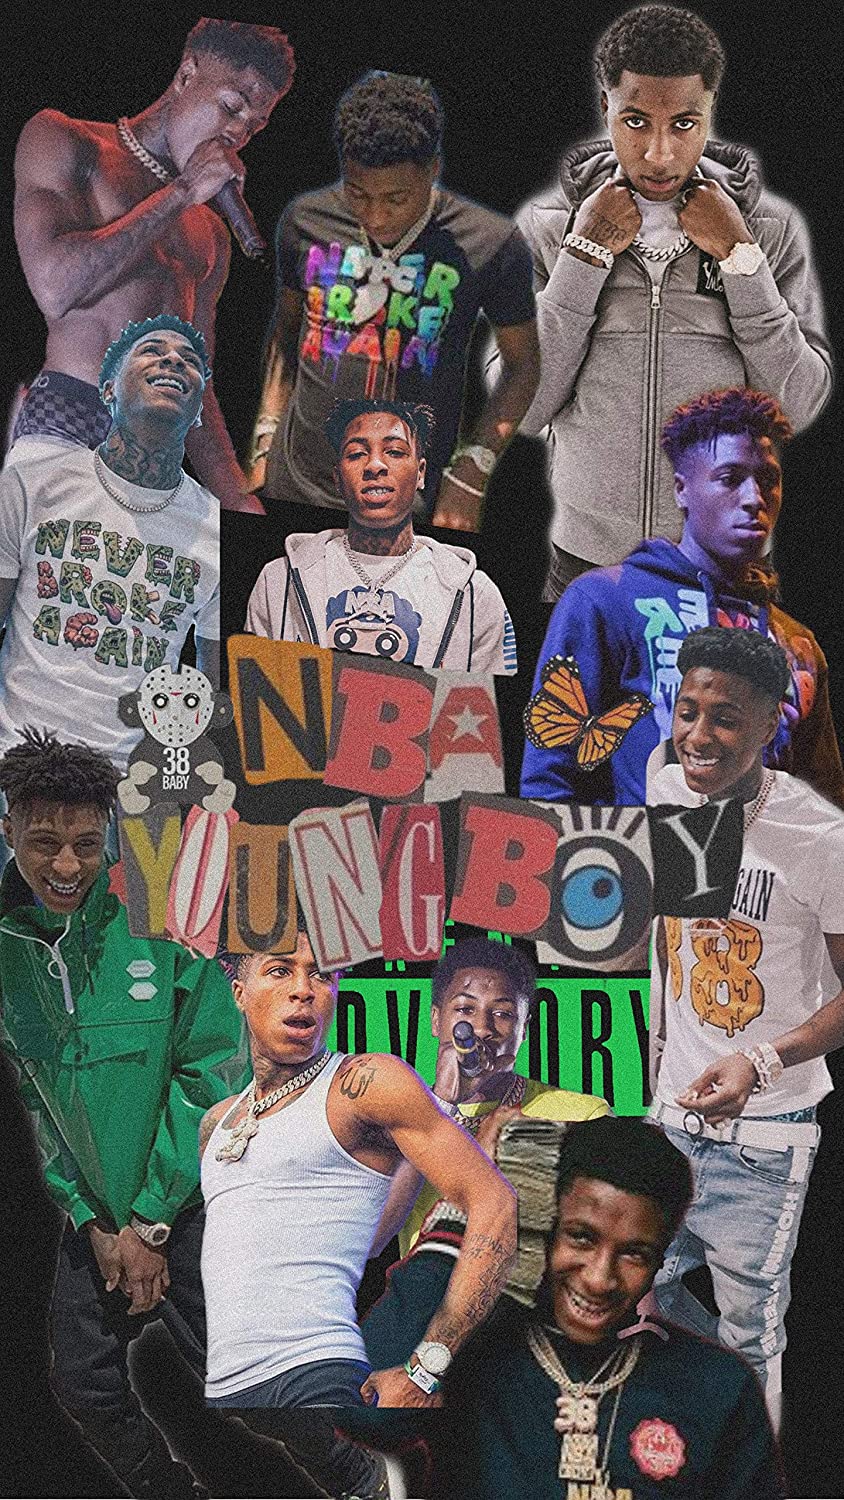 NBA Youngboy Collage Poster Placard Art Decor Gift: Handmade